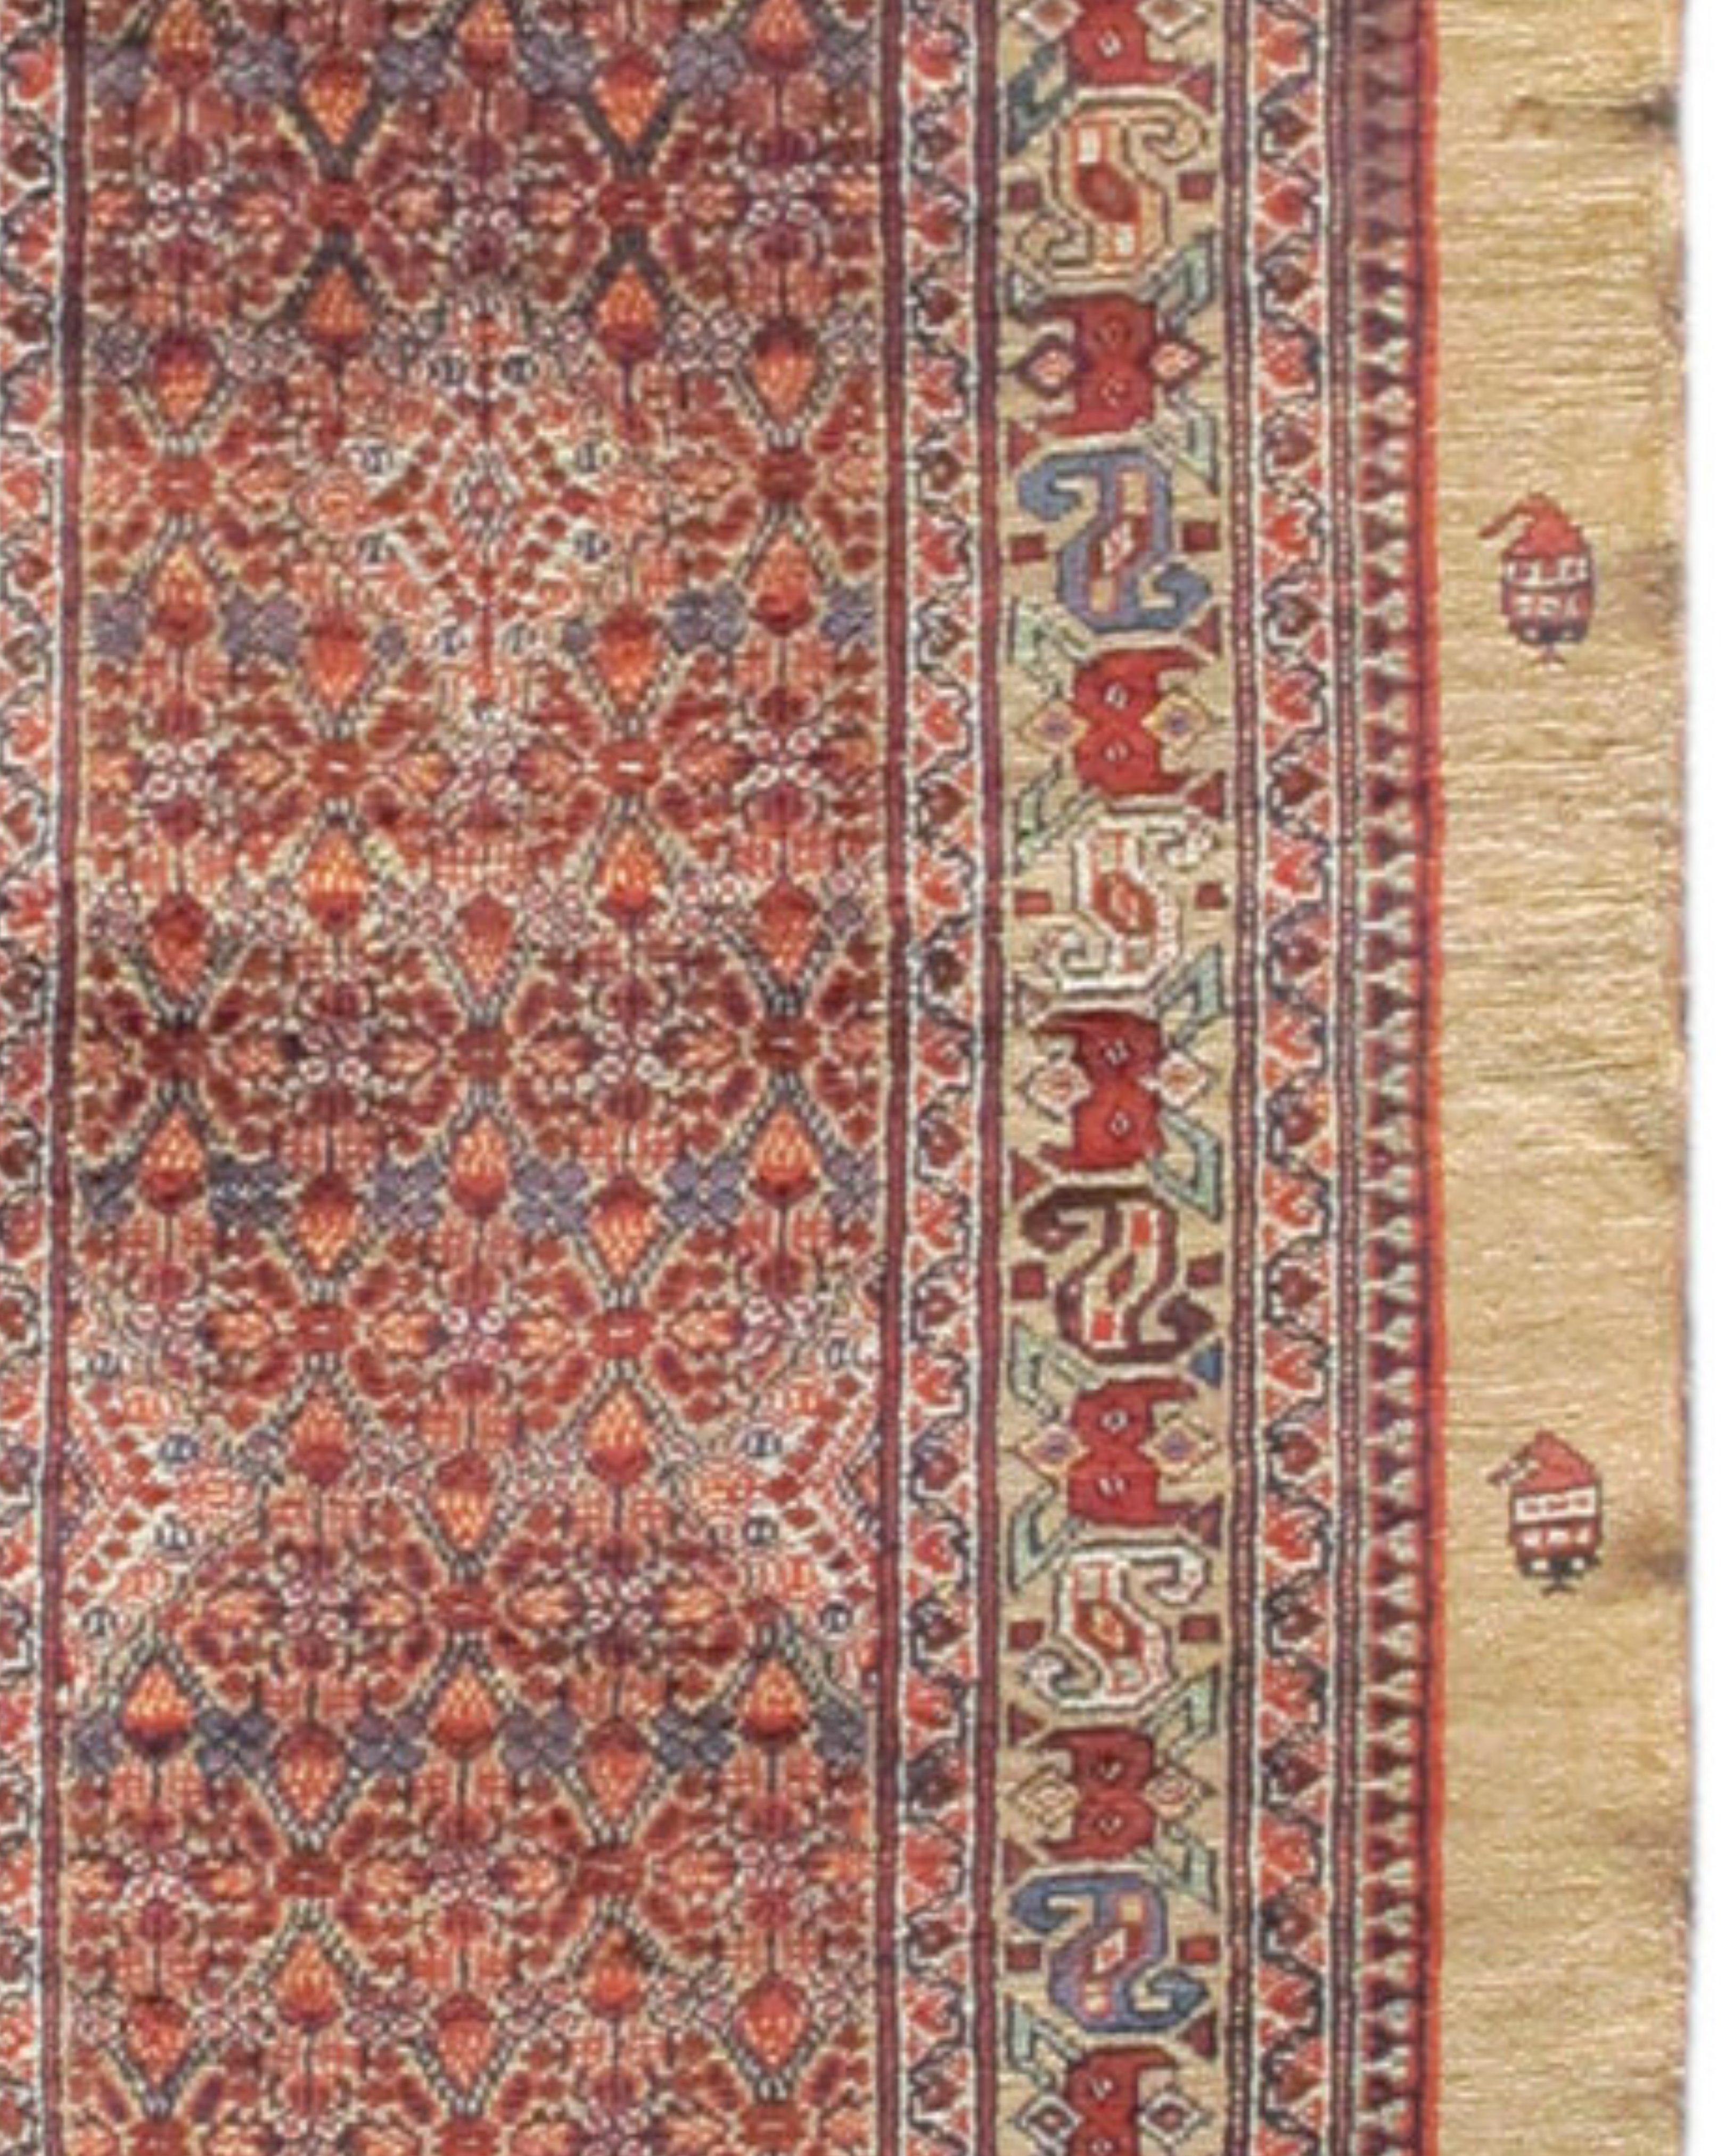 Camel Hamadan Runner Rug, Early 20th century

Additional Information:
Dimensions: 3'9